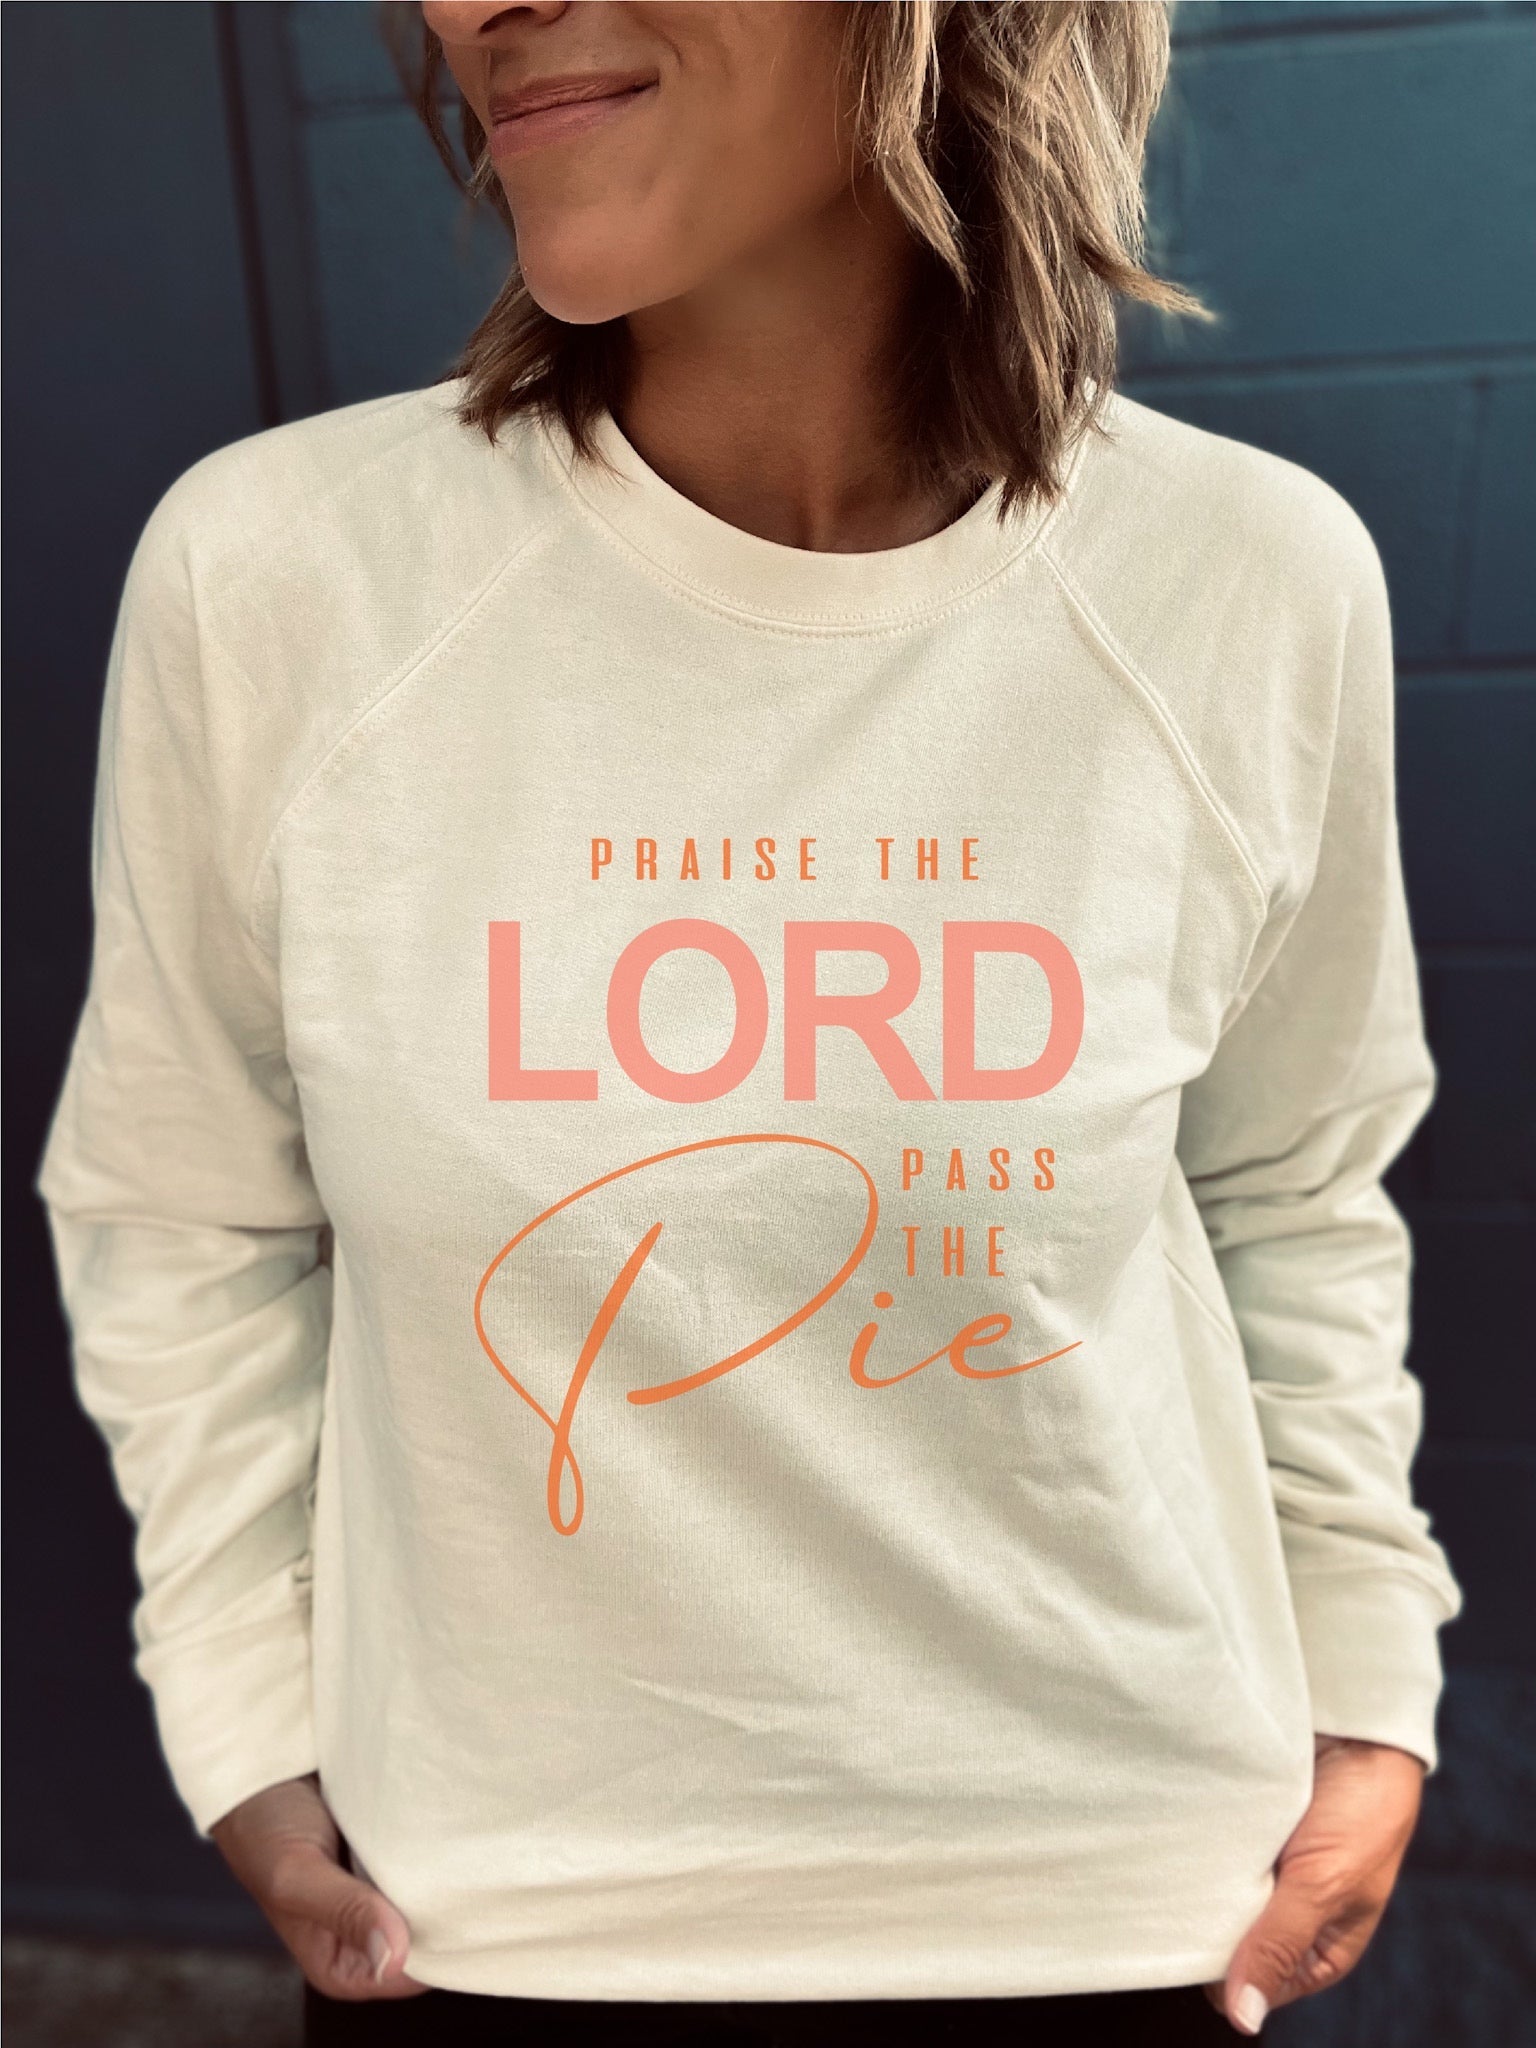 Pass the pie french terry raglan Fall French Terry raglan Independent Trading Co French Terry 